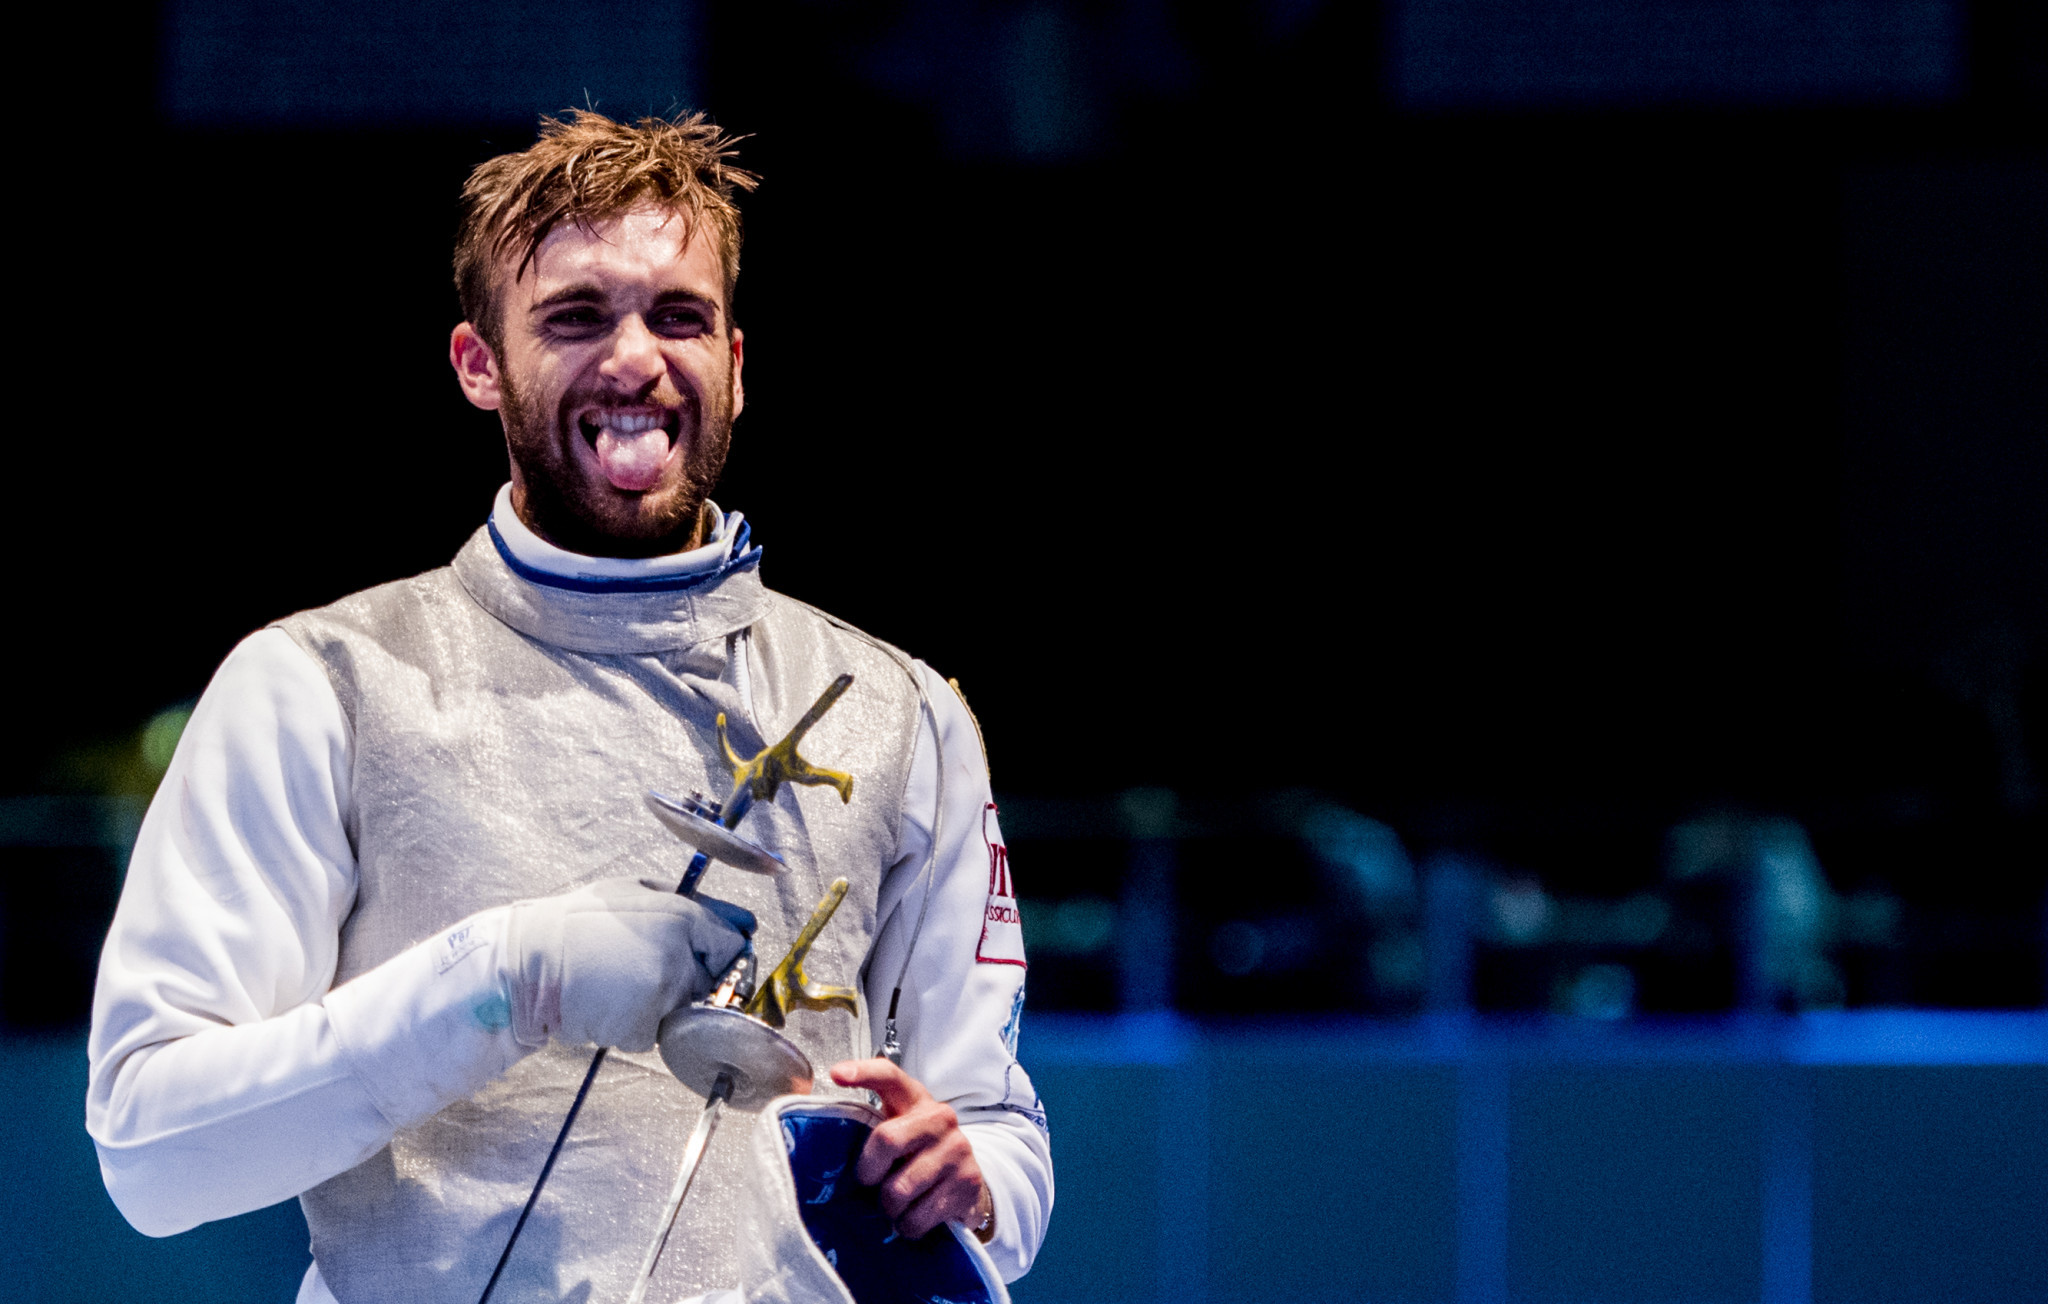 Italy's Rio 2016 champion Daniele Garozzo will face French opposition in his opening match tomorrow at the FIE Men's Foil World Cup in Tokyo, which is doubling as an Olympic Test event ©Getty Images